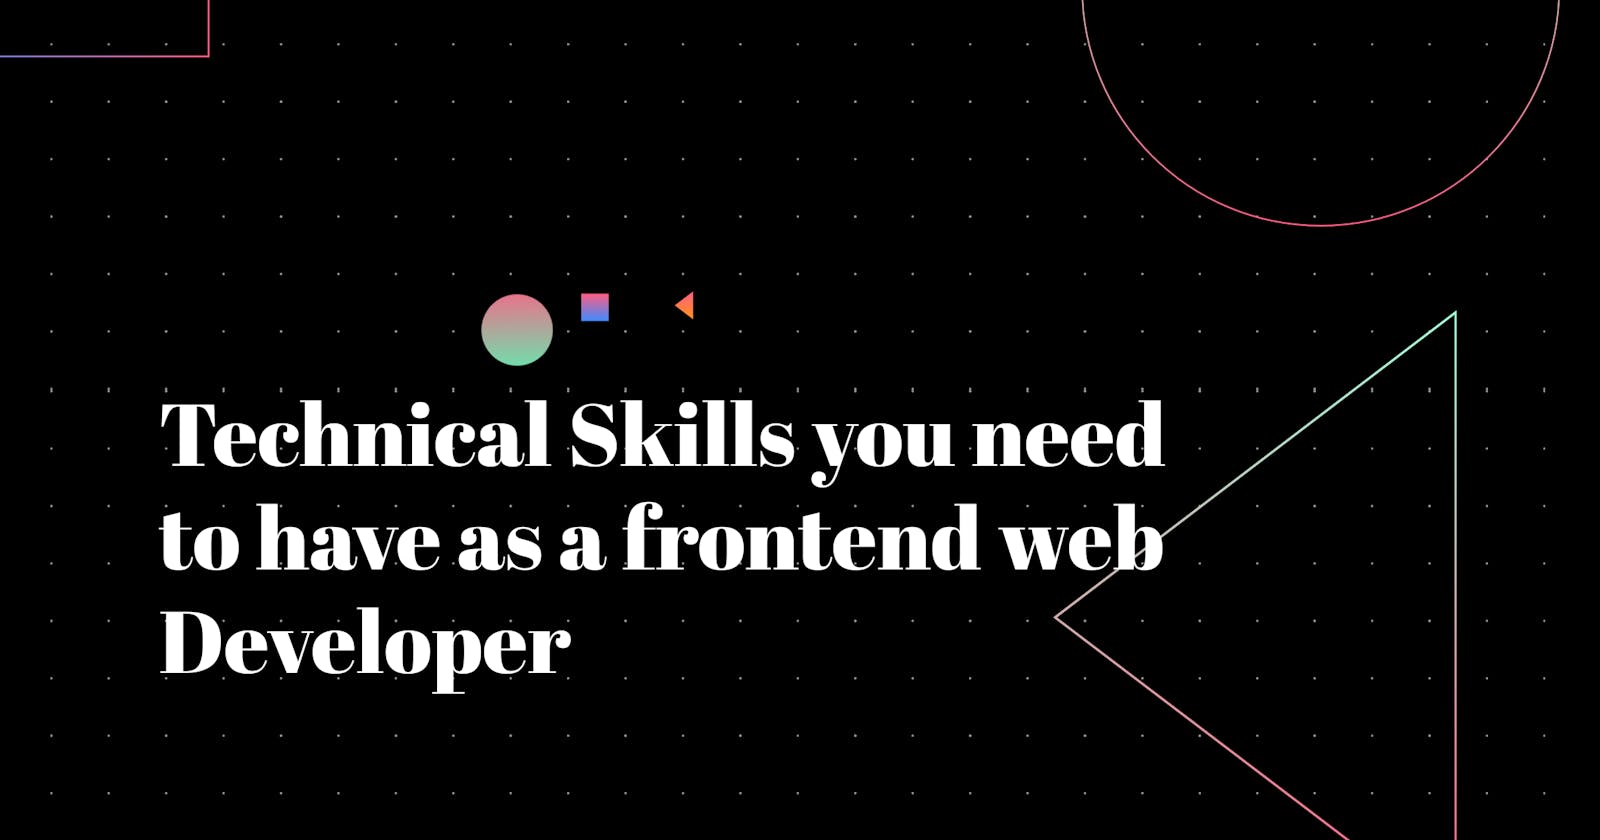 Technical Skills you need to have as a frontend Developer